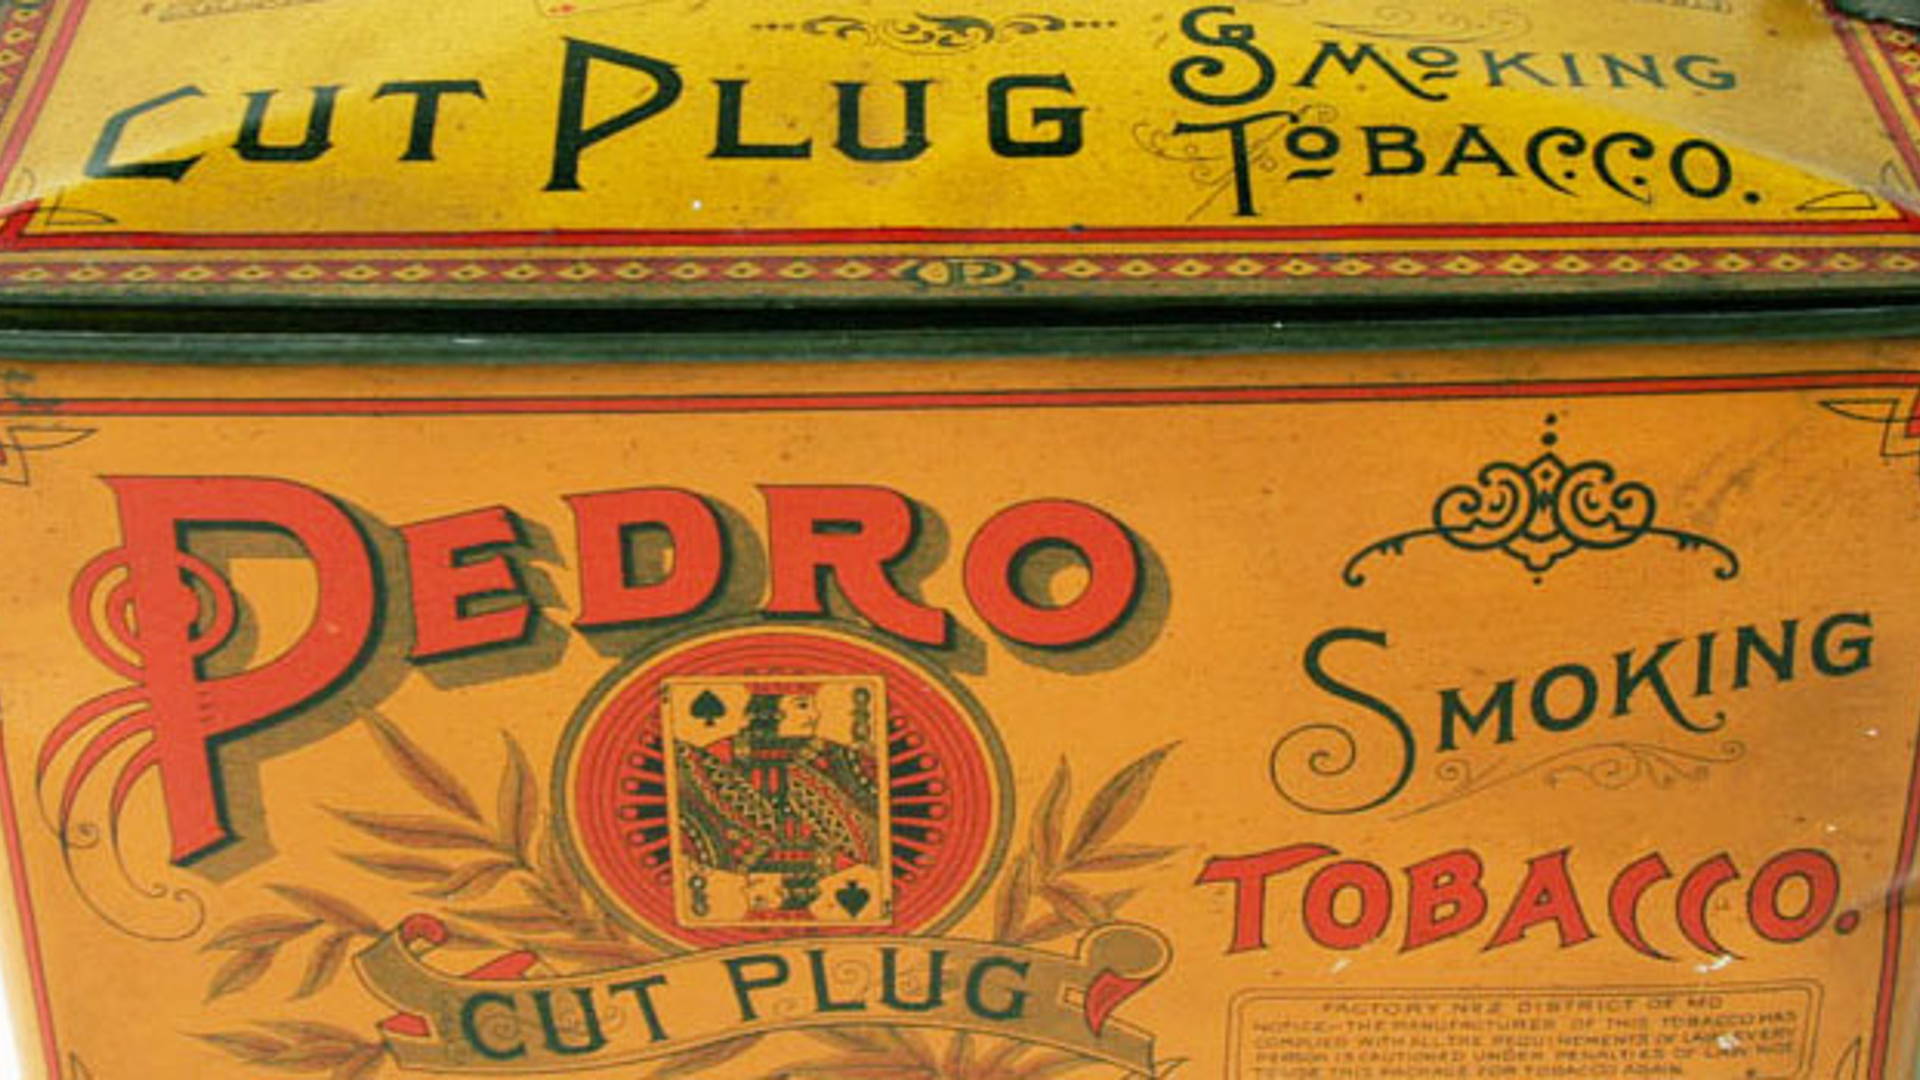 Featured image for Vintage Packaging: Pedro Cut Plug